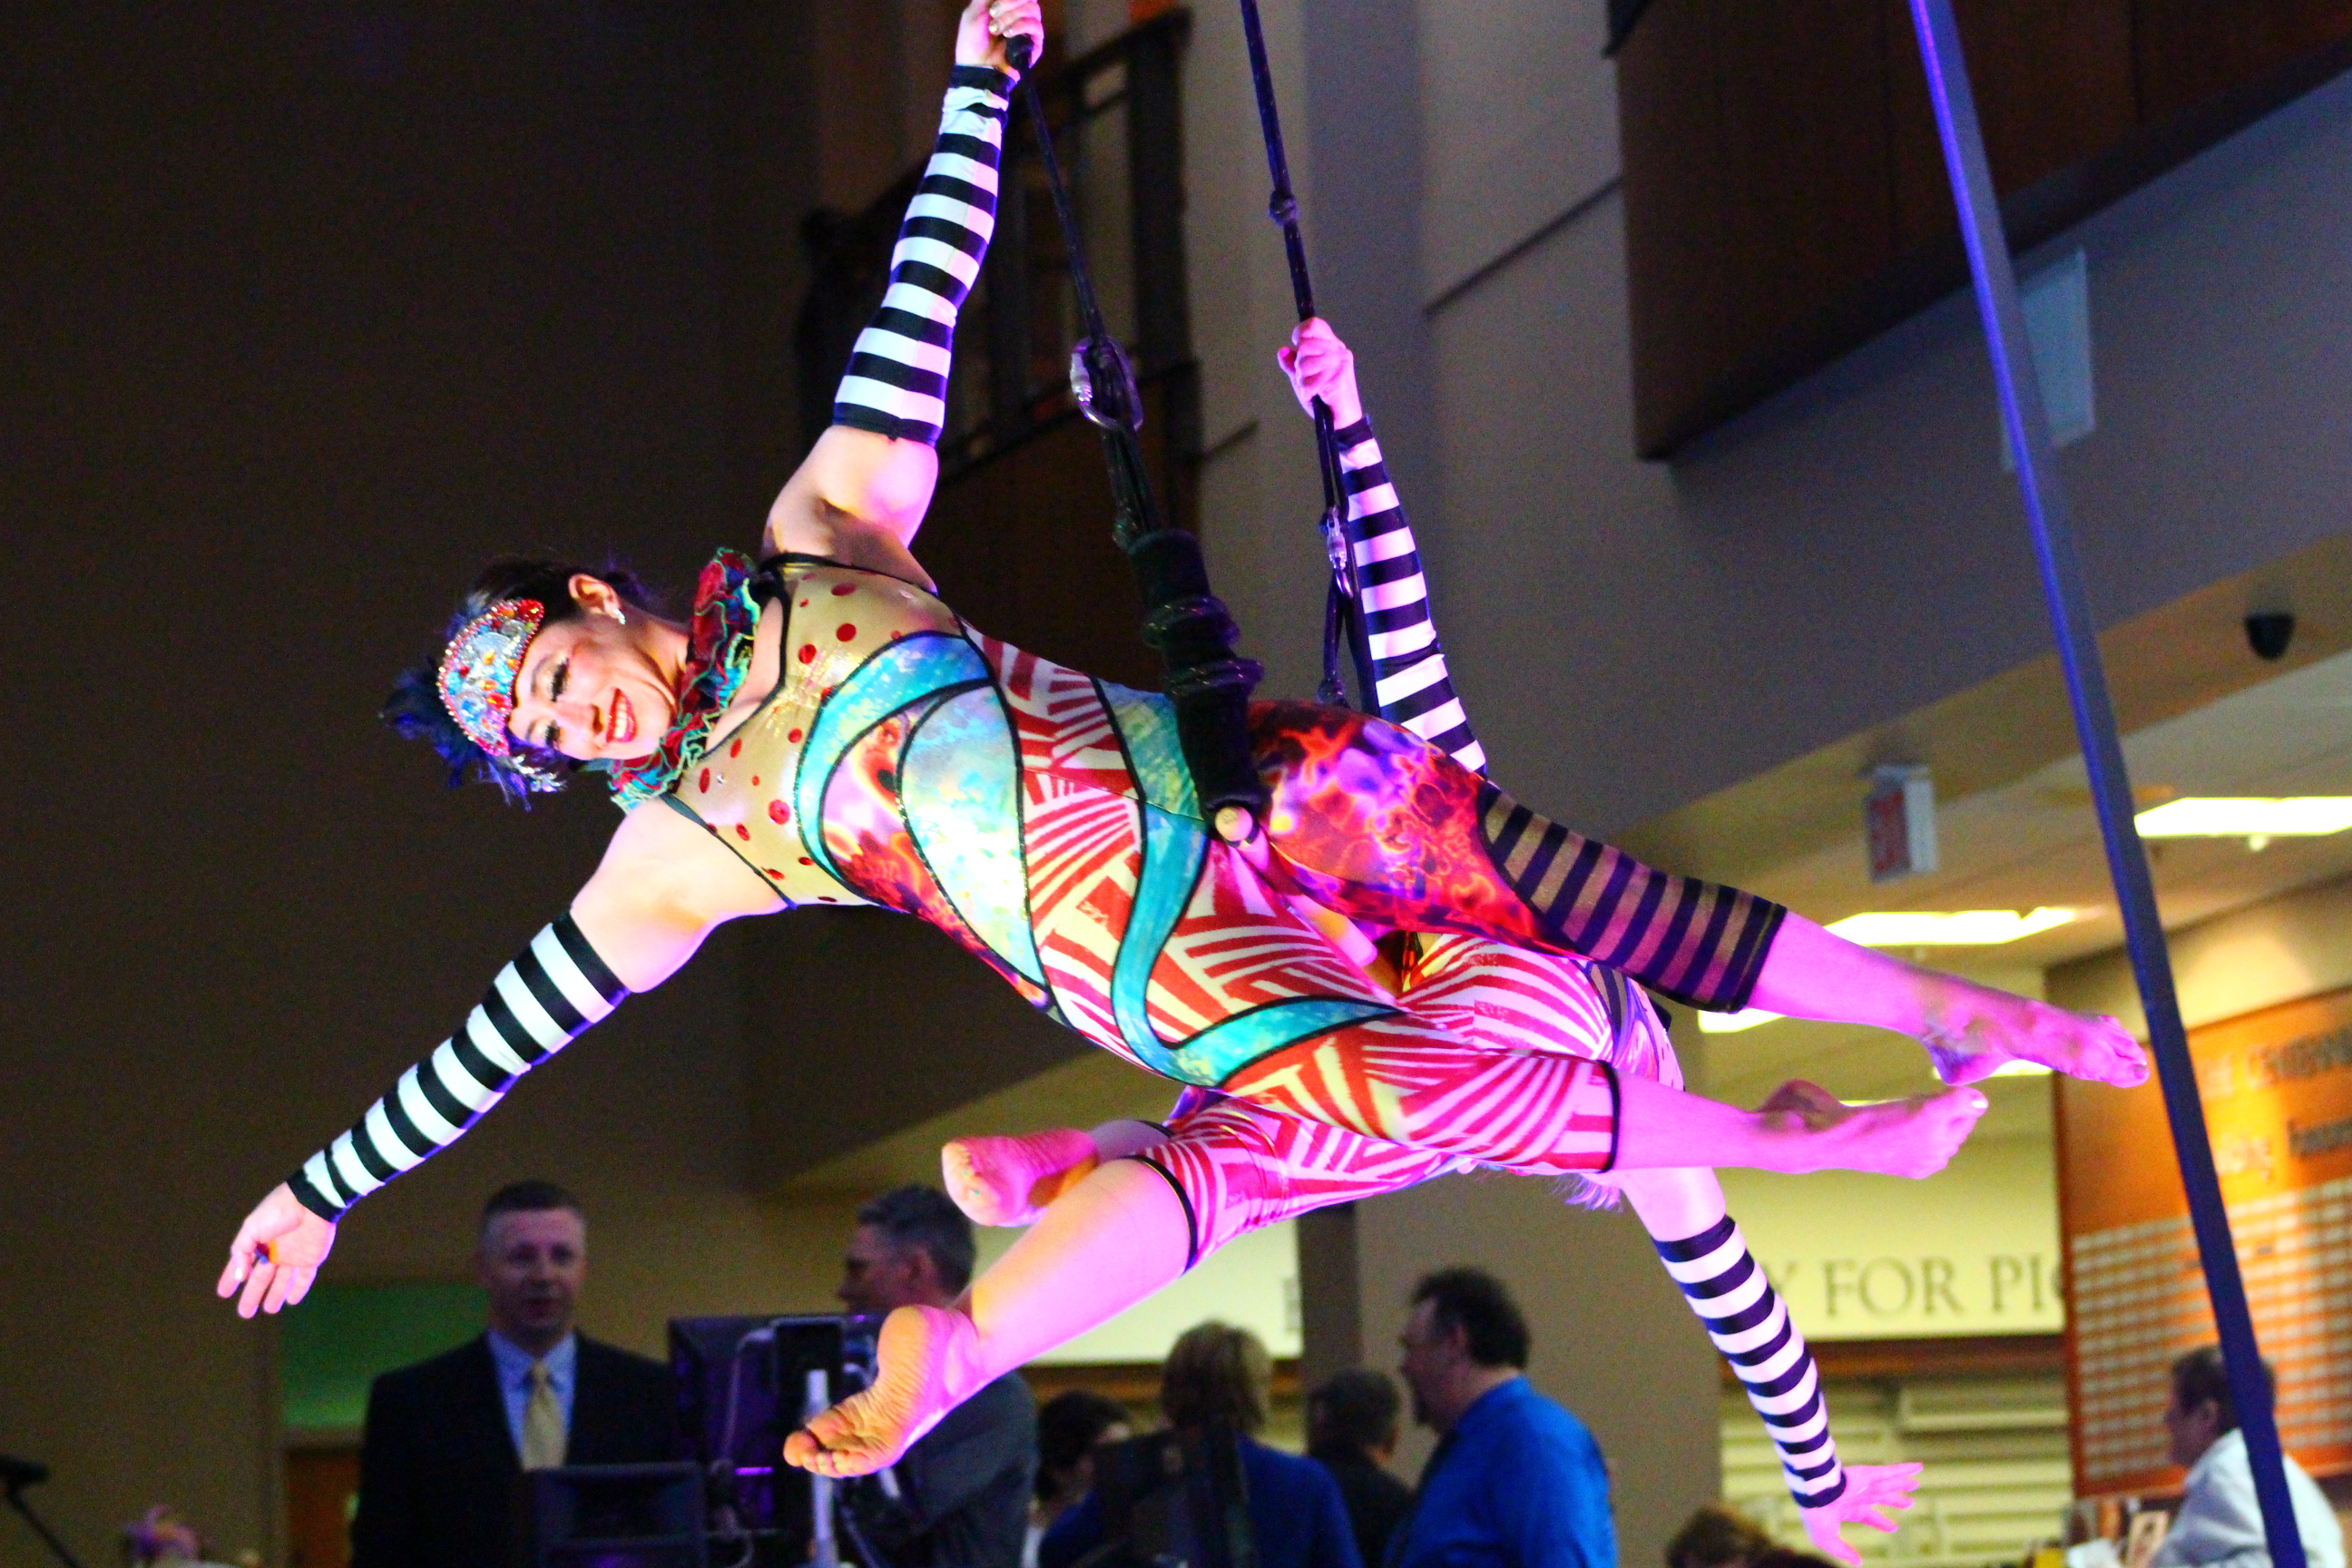 Aerial performers in costume suspended from ropes